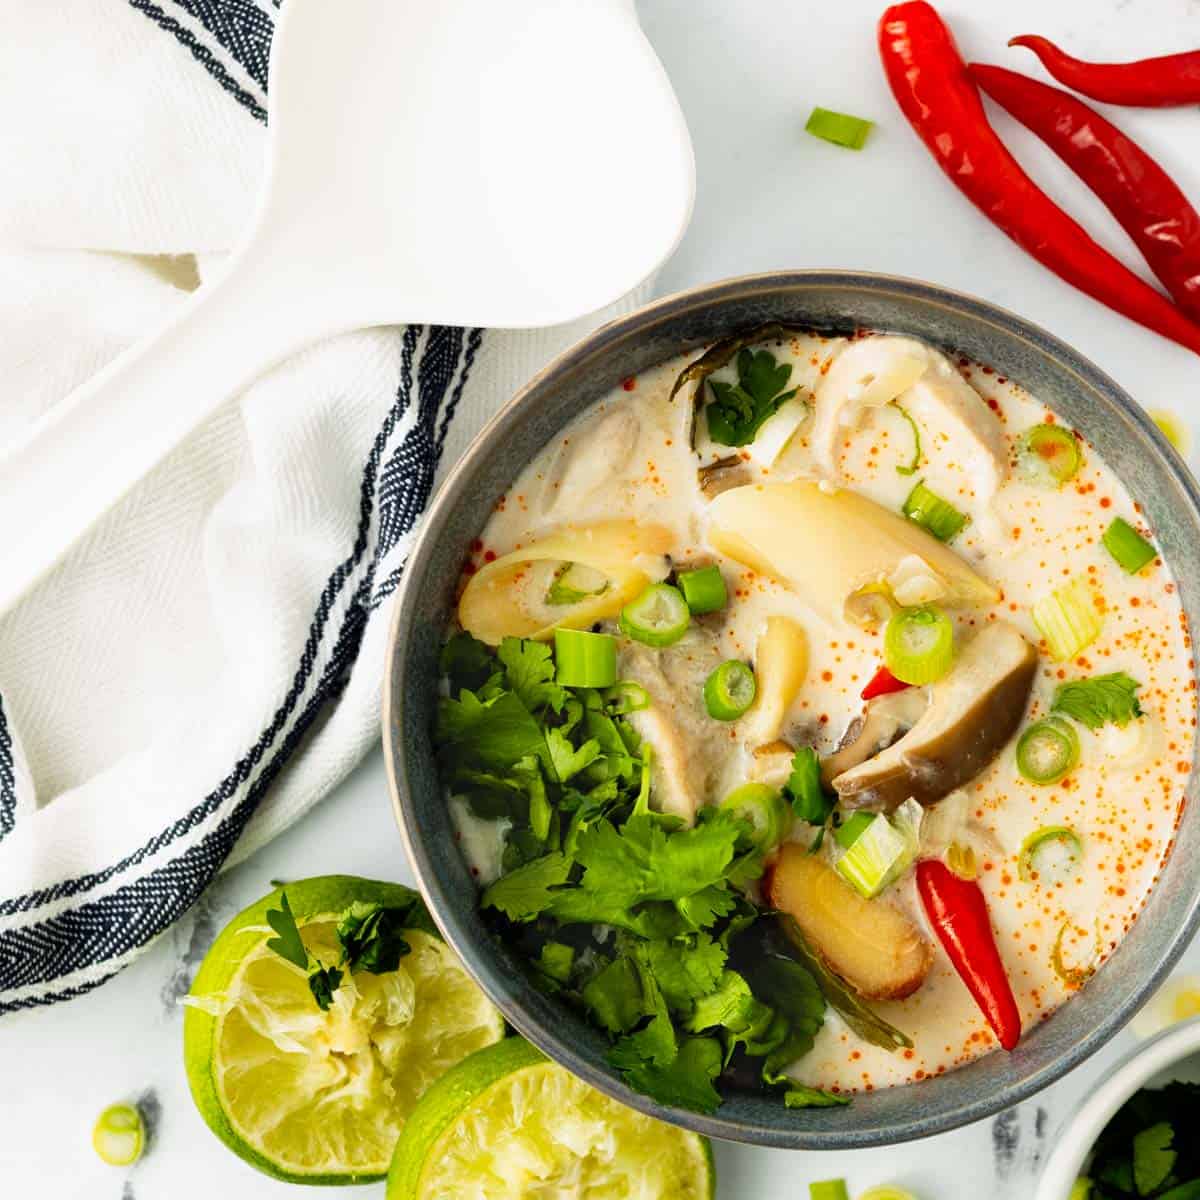 Finished Tom Ka Gai Soup in a gray bowl is surrounded by mushrooms, lime, red chilies, green onions, and cilantro garnishes on a white marble background.